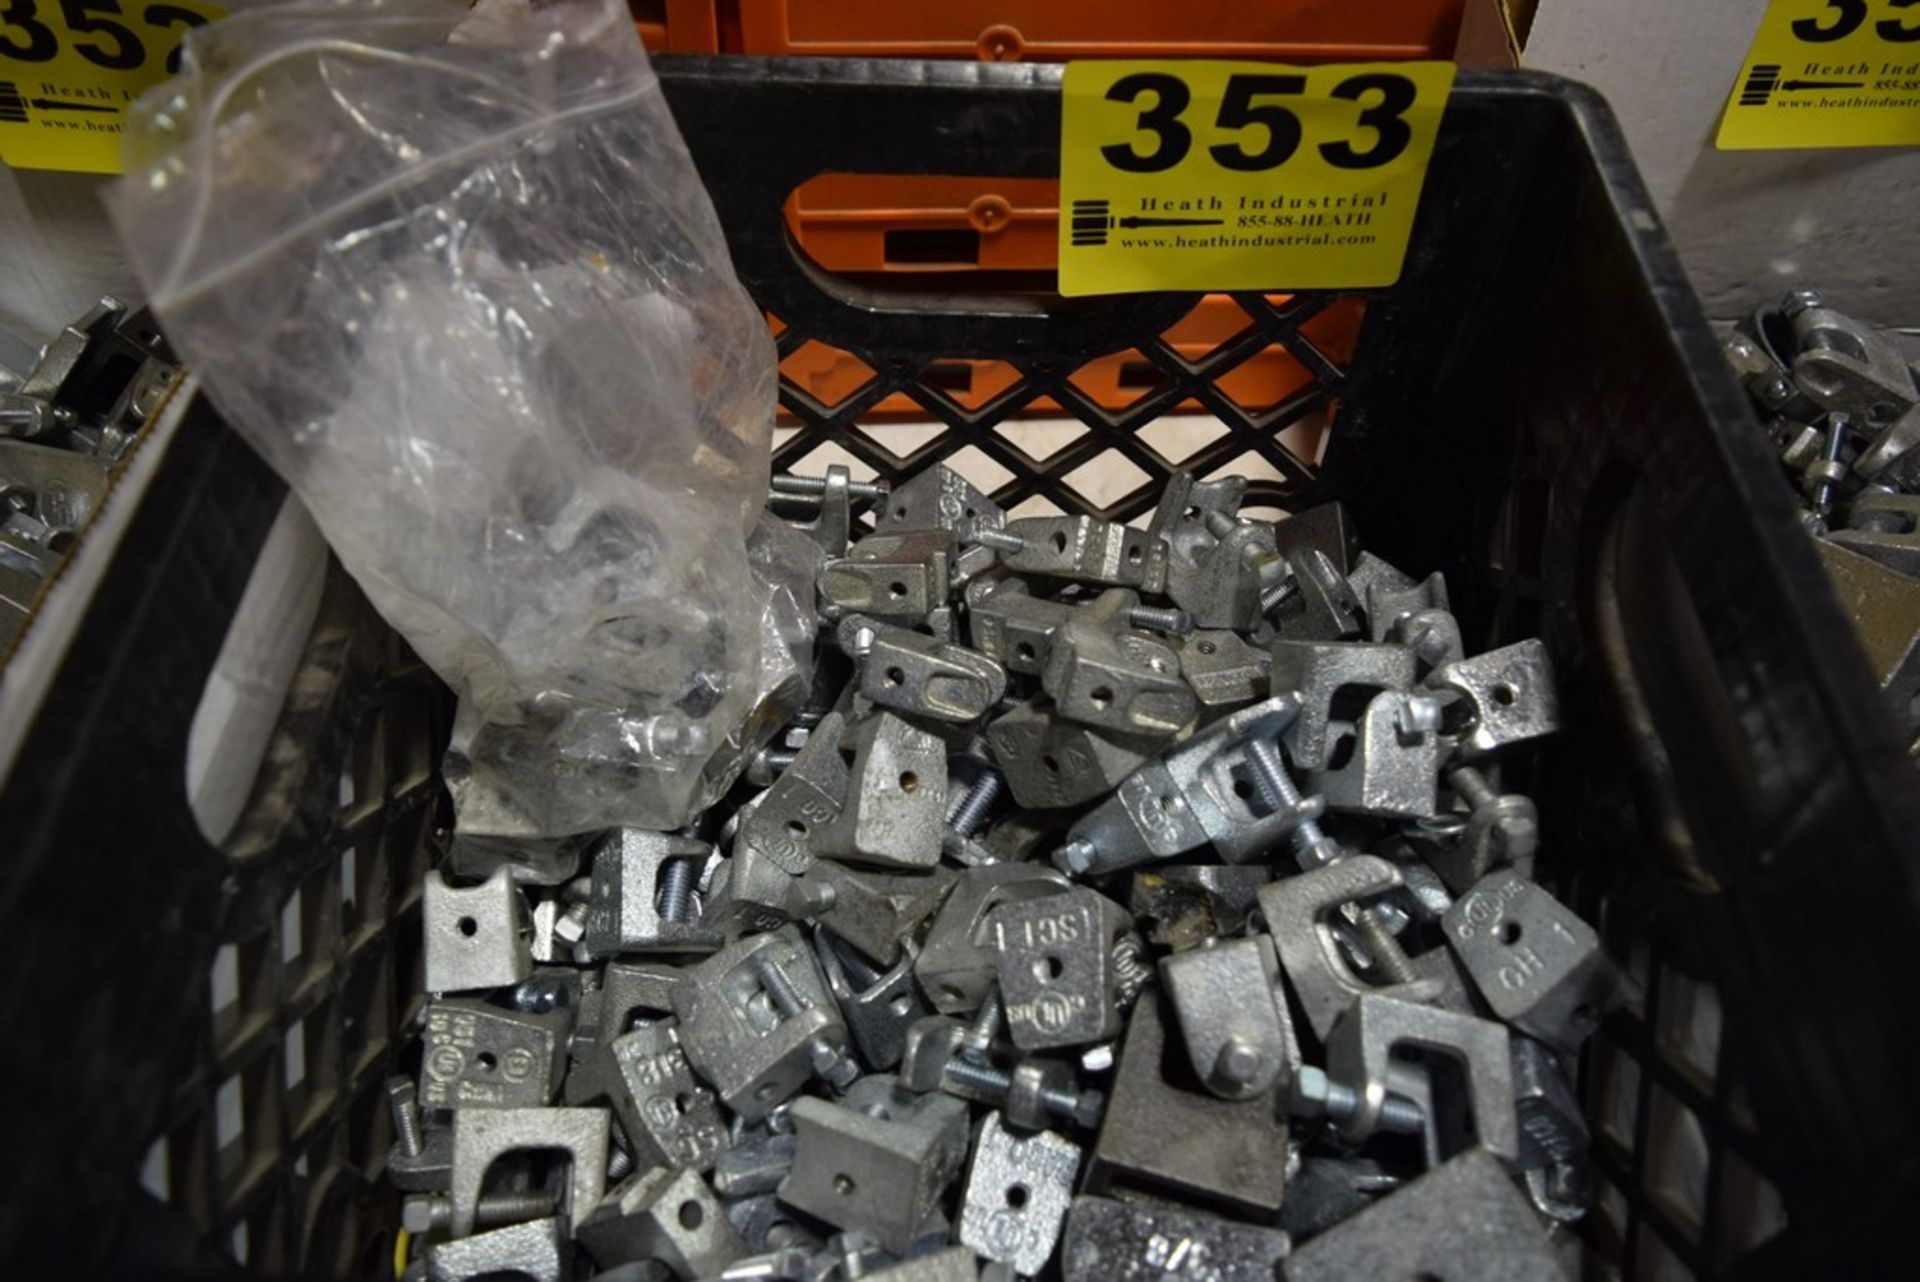 ASSORTED BEAM CLAMPS IN BOX